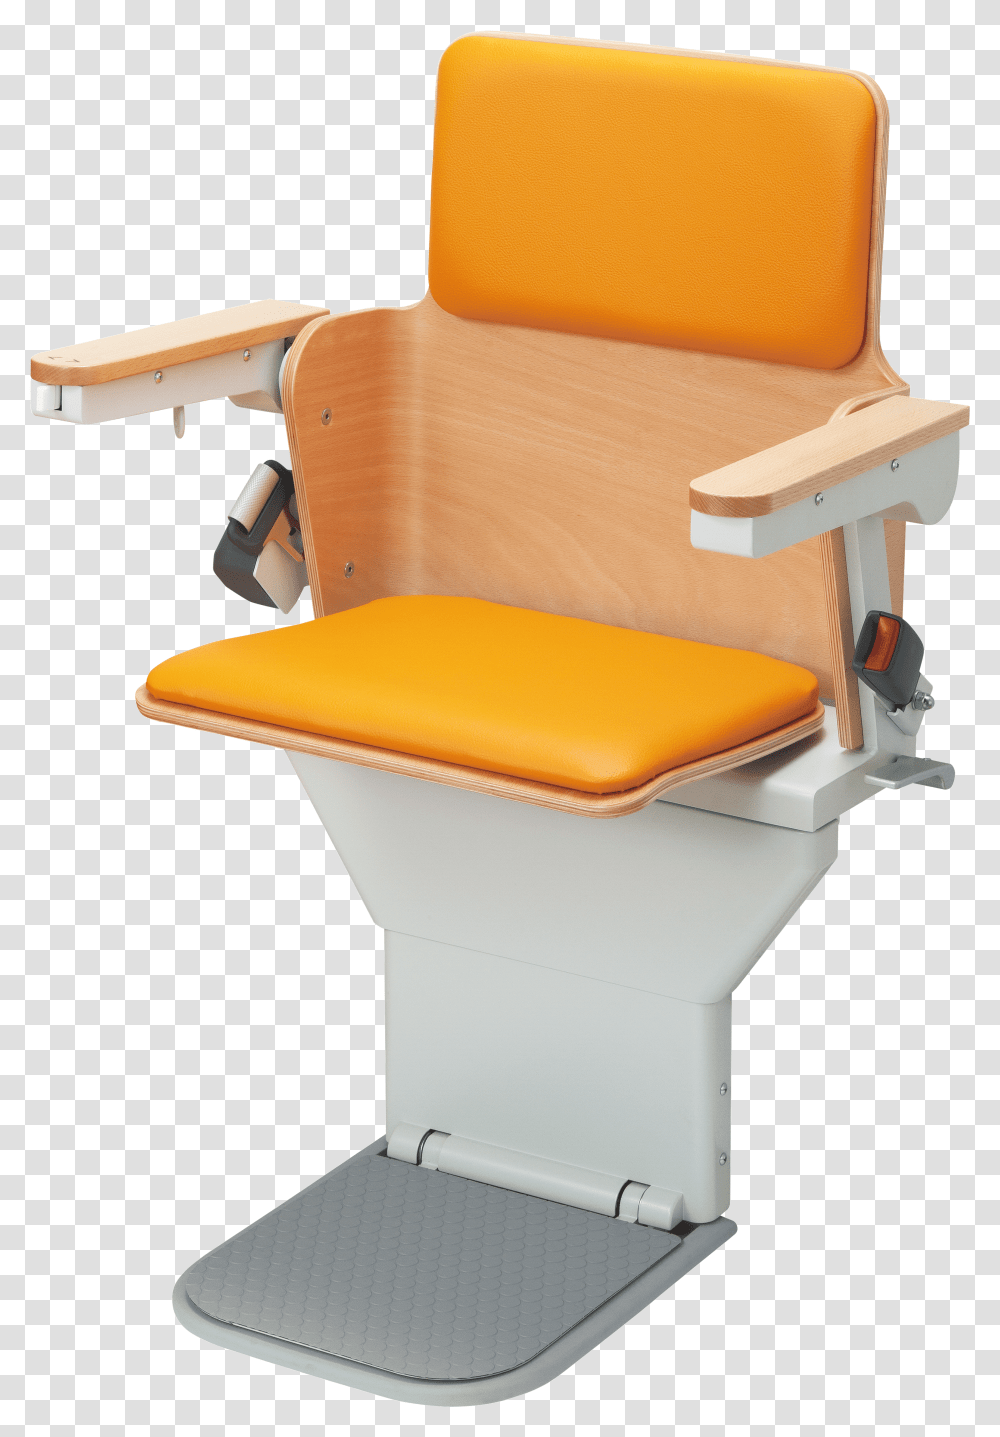 Stair Lift Orange Stair Lift, Furniture, Chair, Armchair, Couch Transparent Png